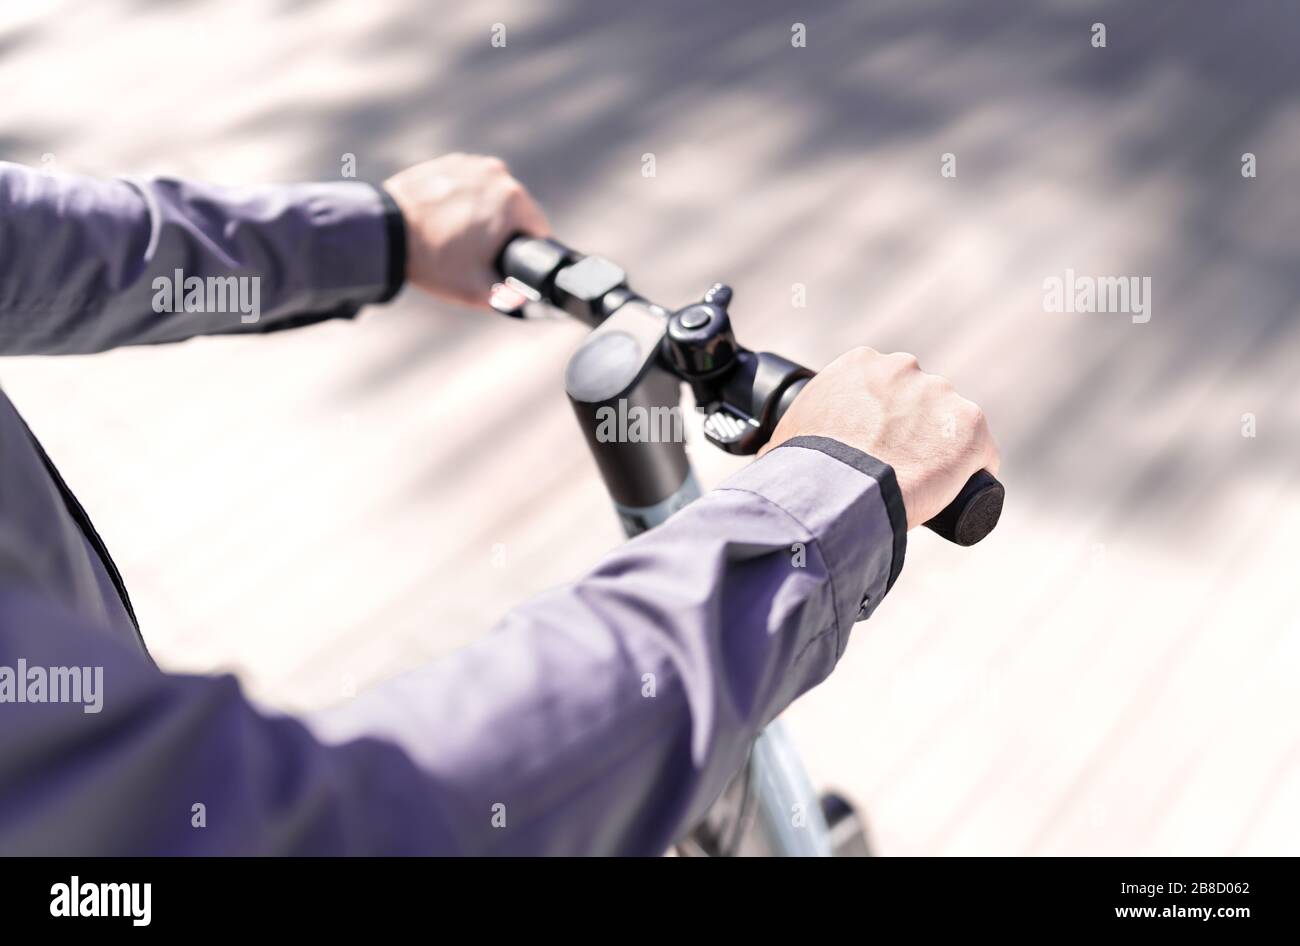 Man driving electric kick scooter fast in city street. High speed e rent vehicle. Transportation safety in traffic concept. Millennial business person. Stock Photo